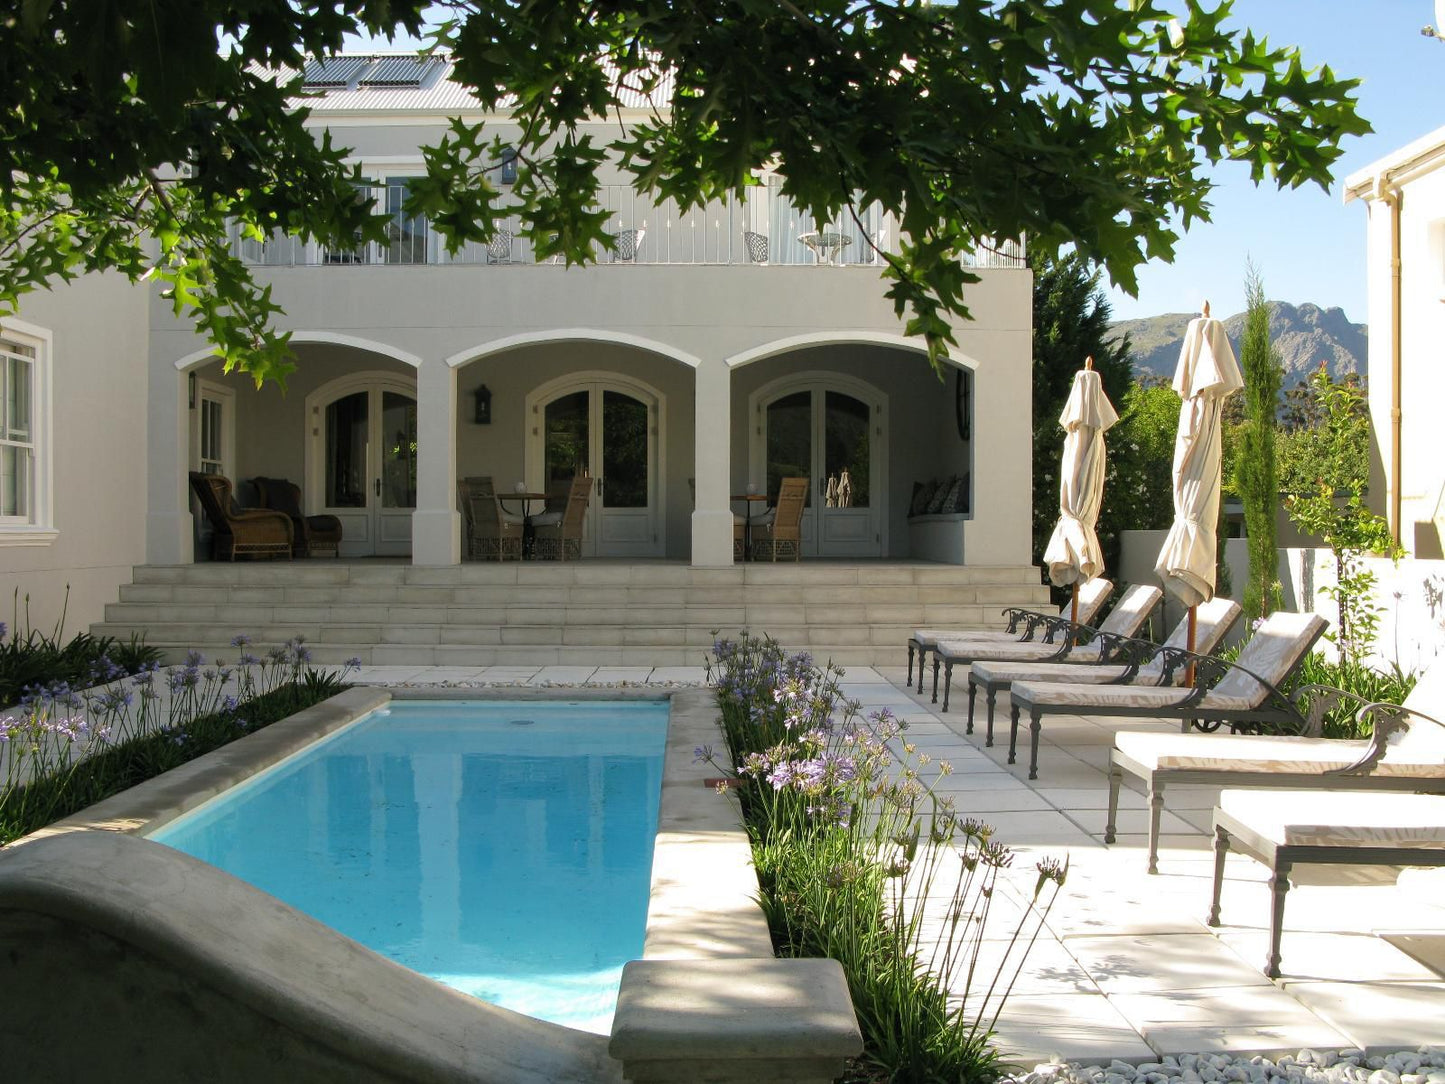 Maison D Ail Guest House Franschhoek Western Cape South Africa House, Building, Architecture, Swimming Pool